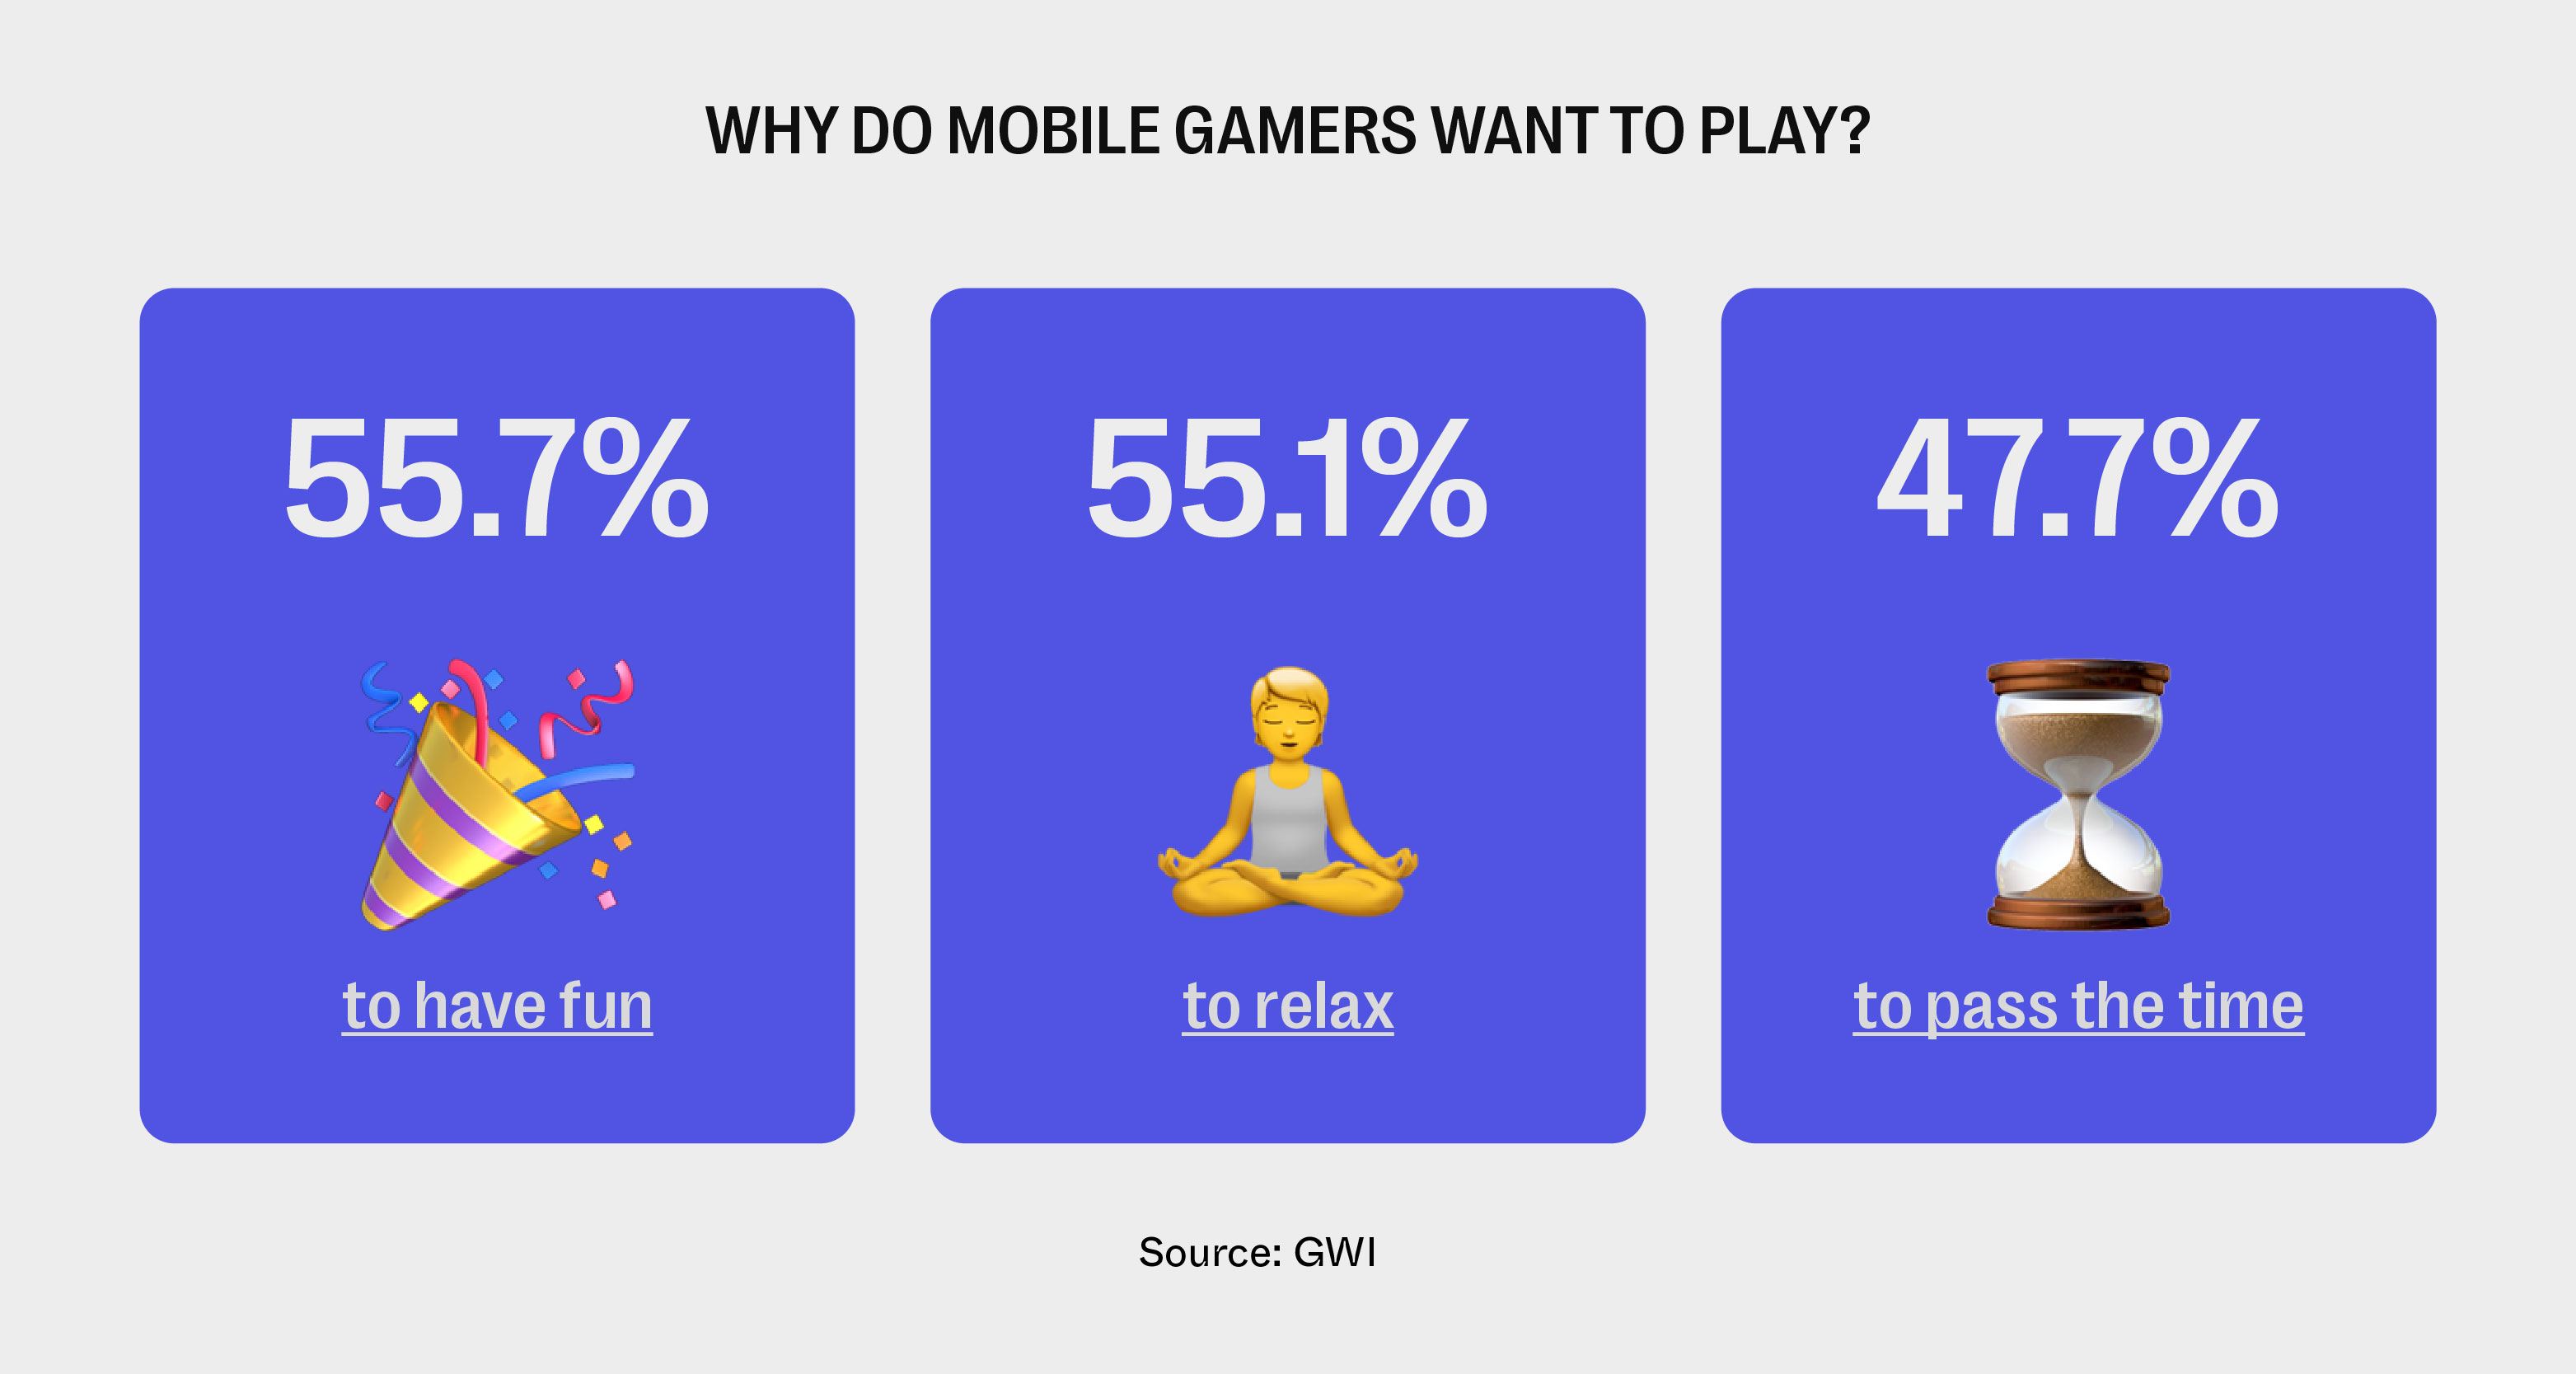 Playing for purpose: Mobile games are changing the world for the better